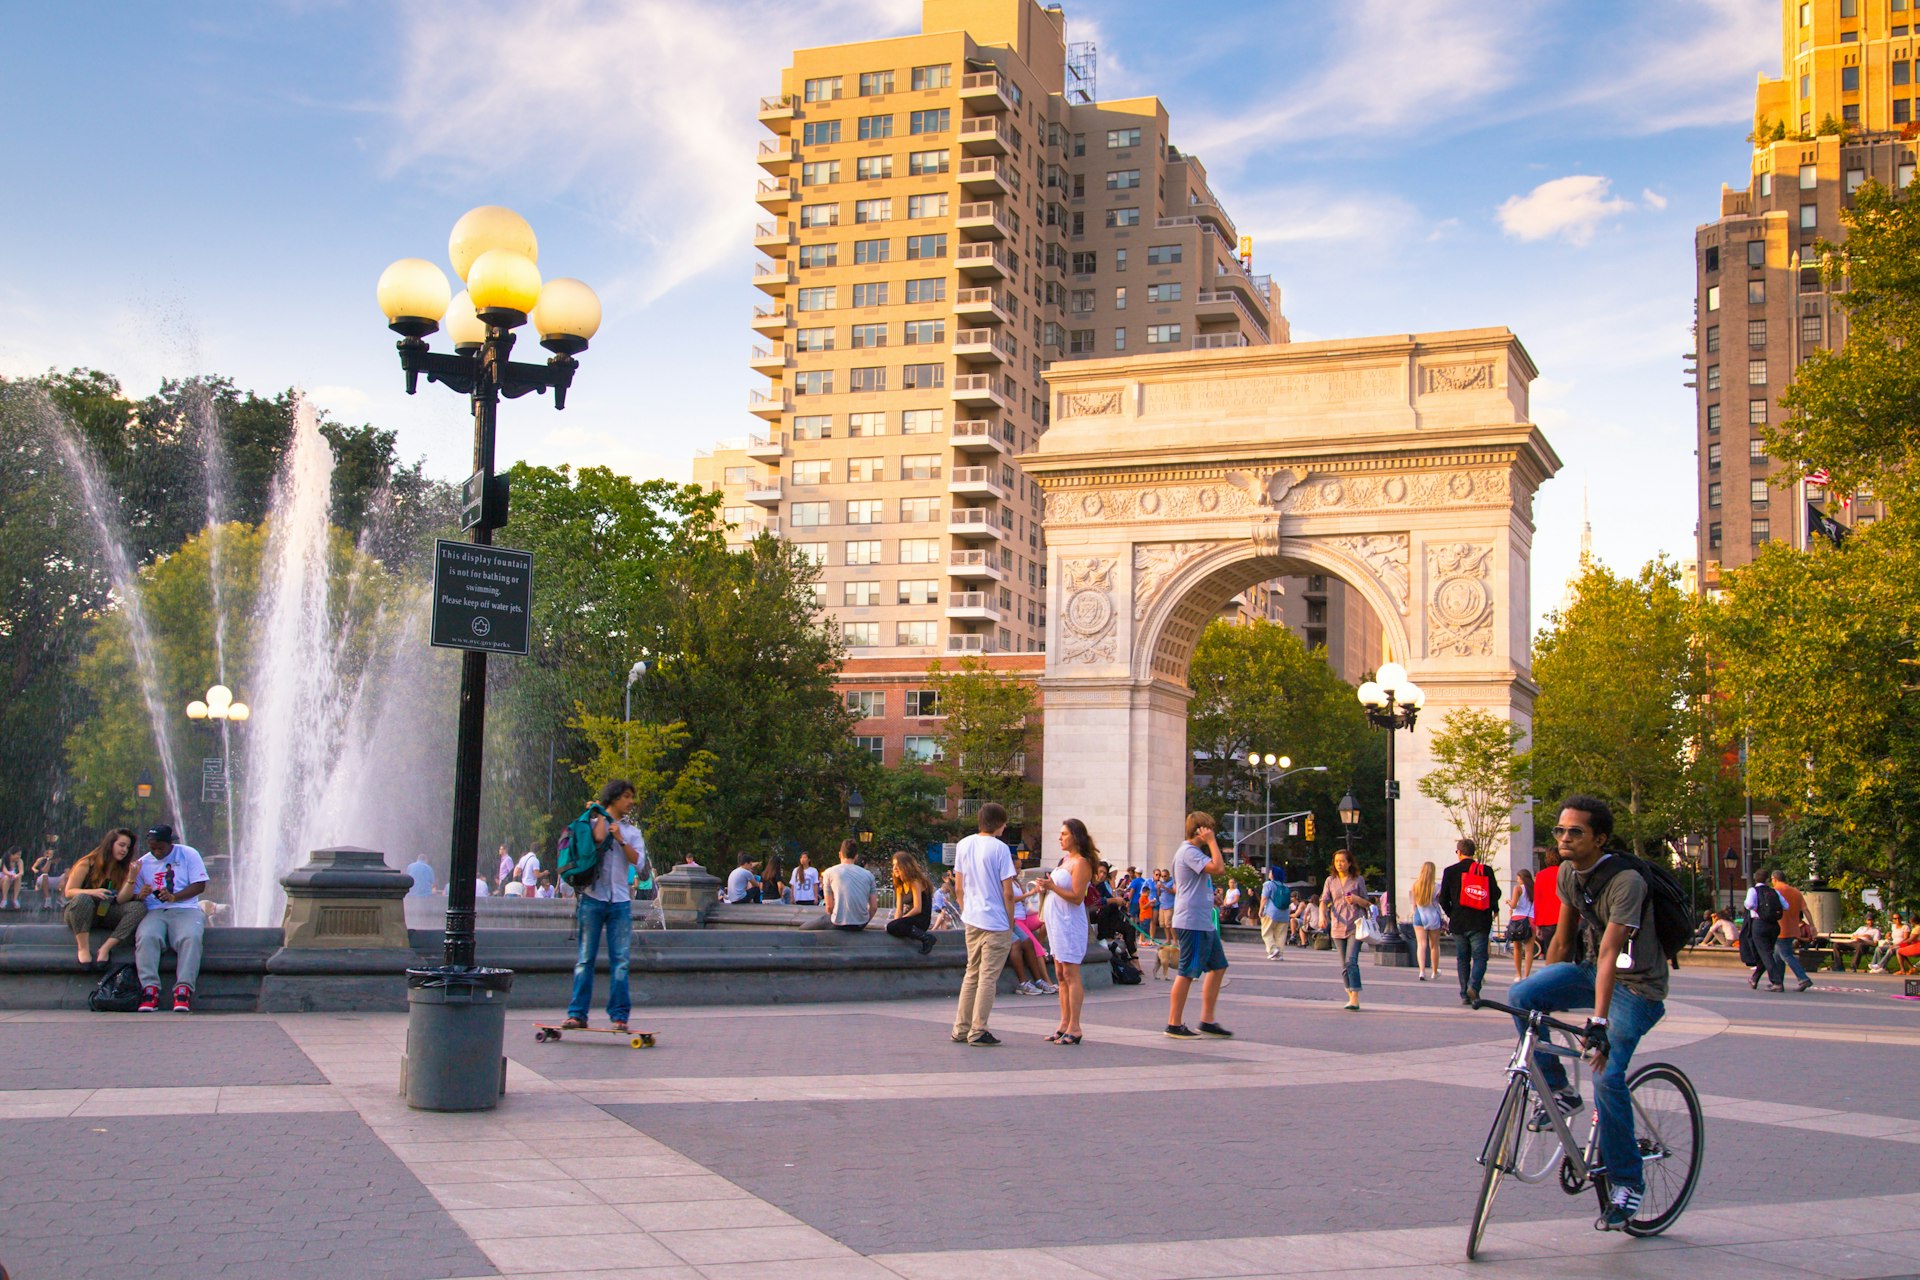 People walk and a person rides a bike during a summer evening at Washington Square Park in Manhattan